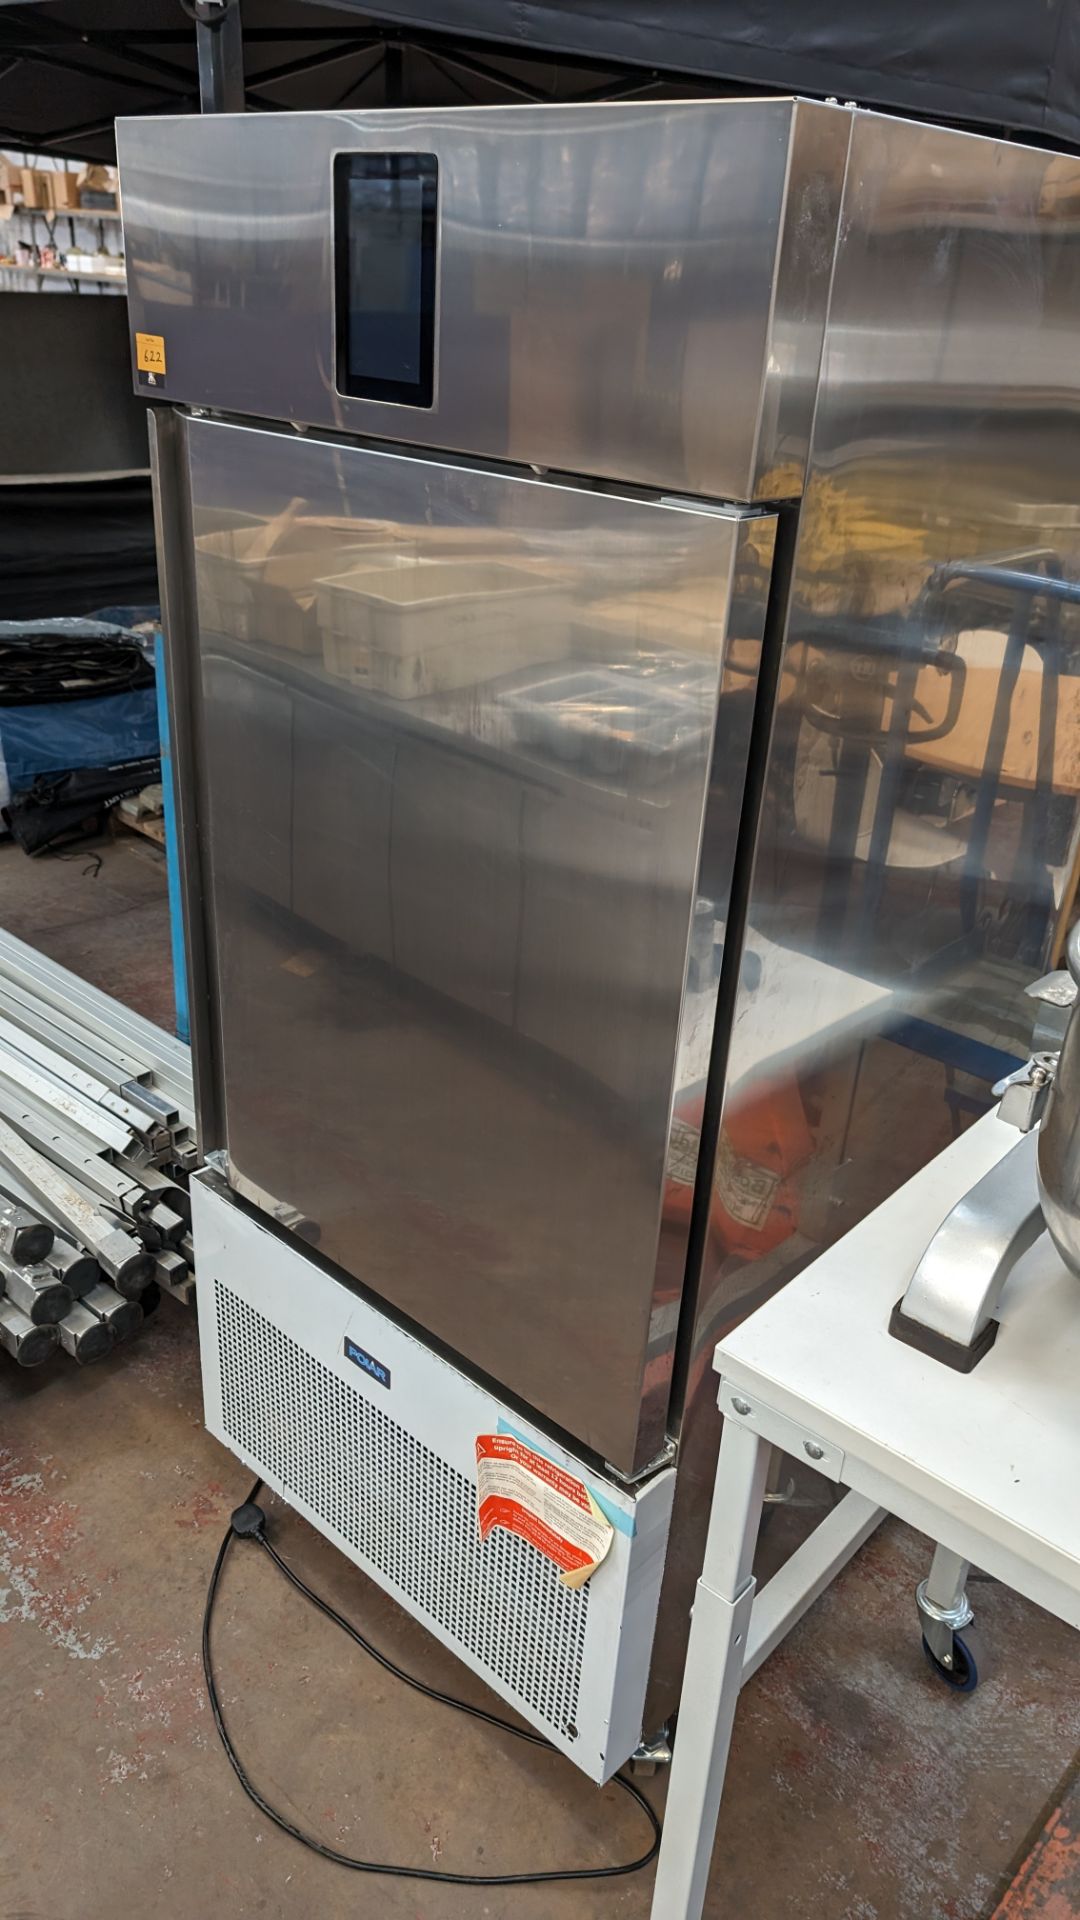 Polar Refrigeration mobile stainless steel commercial blast chiller with touchscreen controls - Bild 9 aus 9